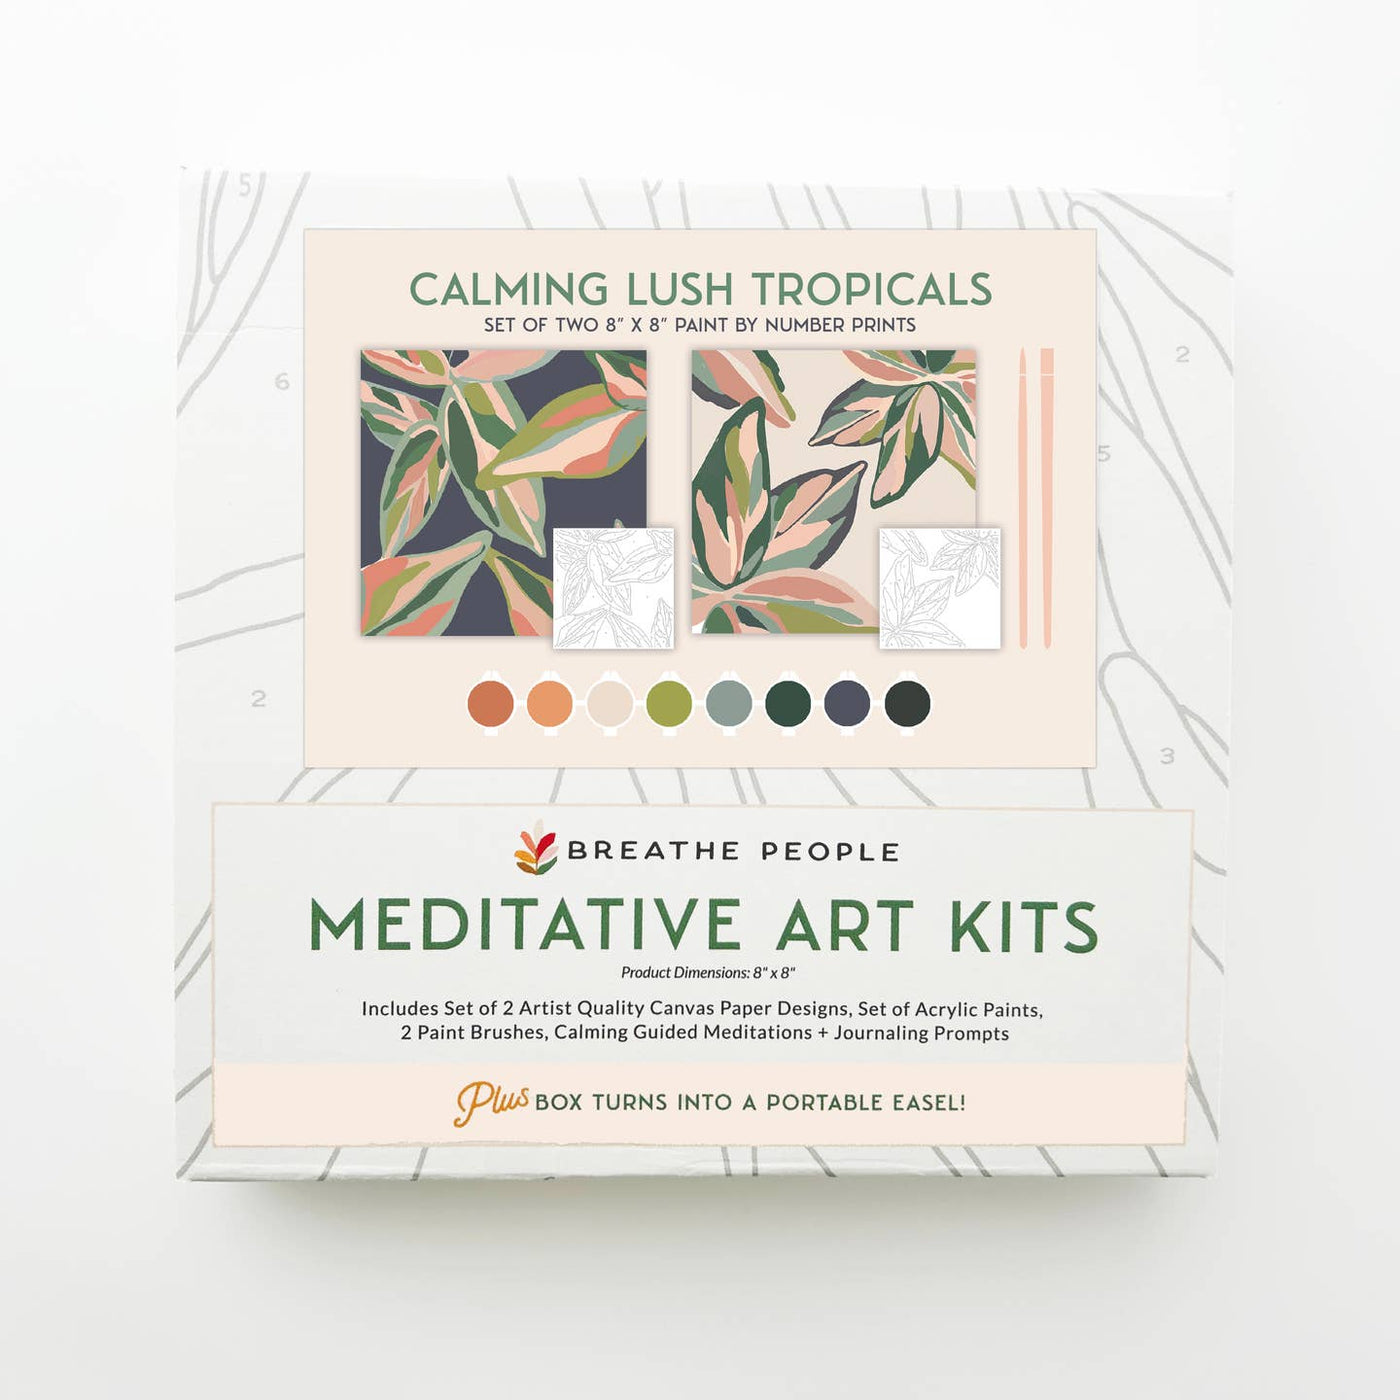 Calming Lush Tropicals Meditative Art Paint-by-Number Kit